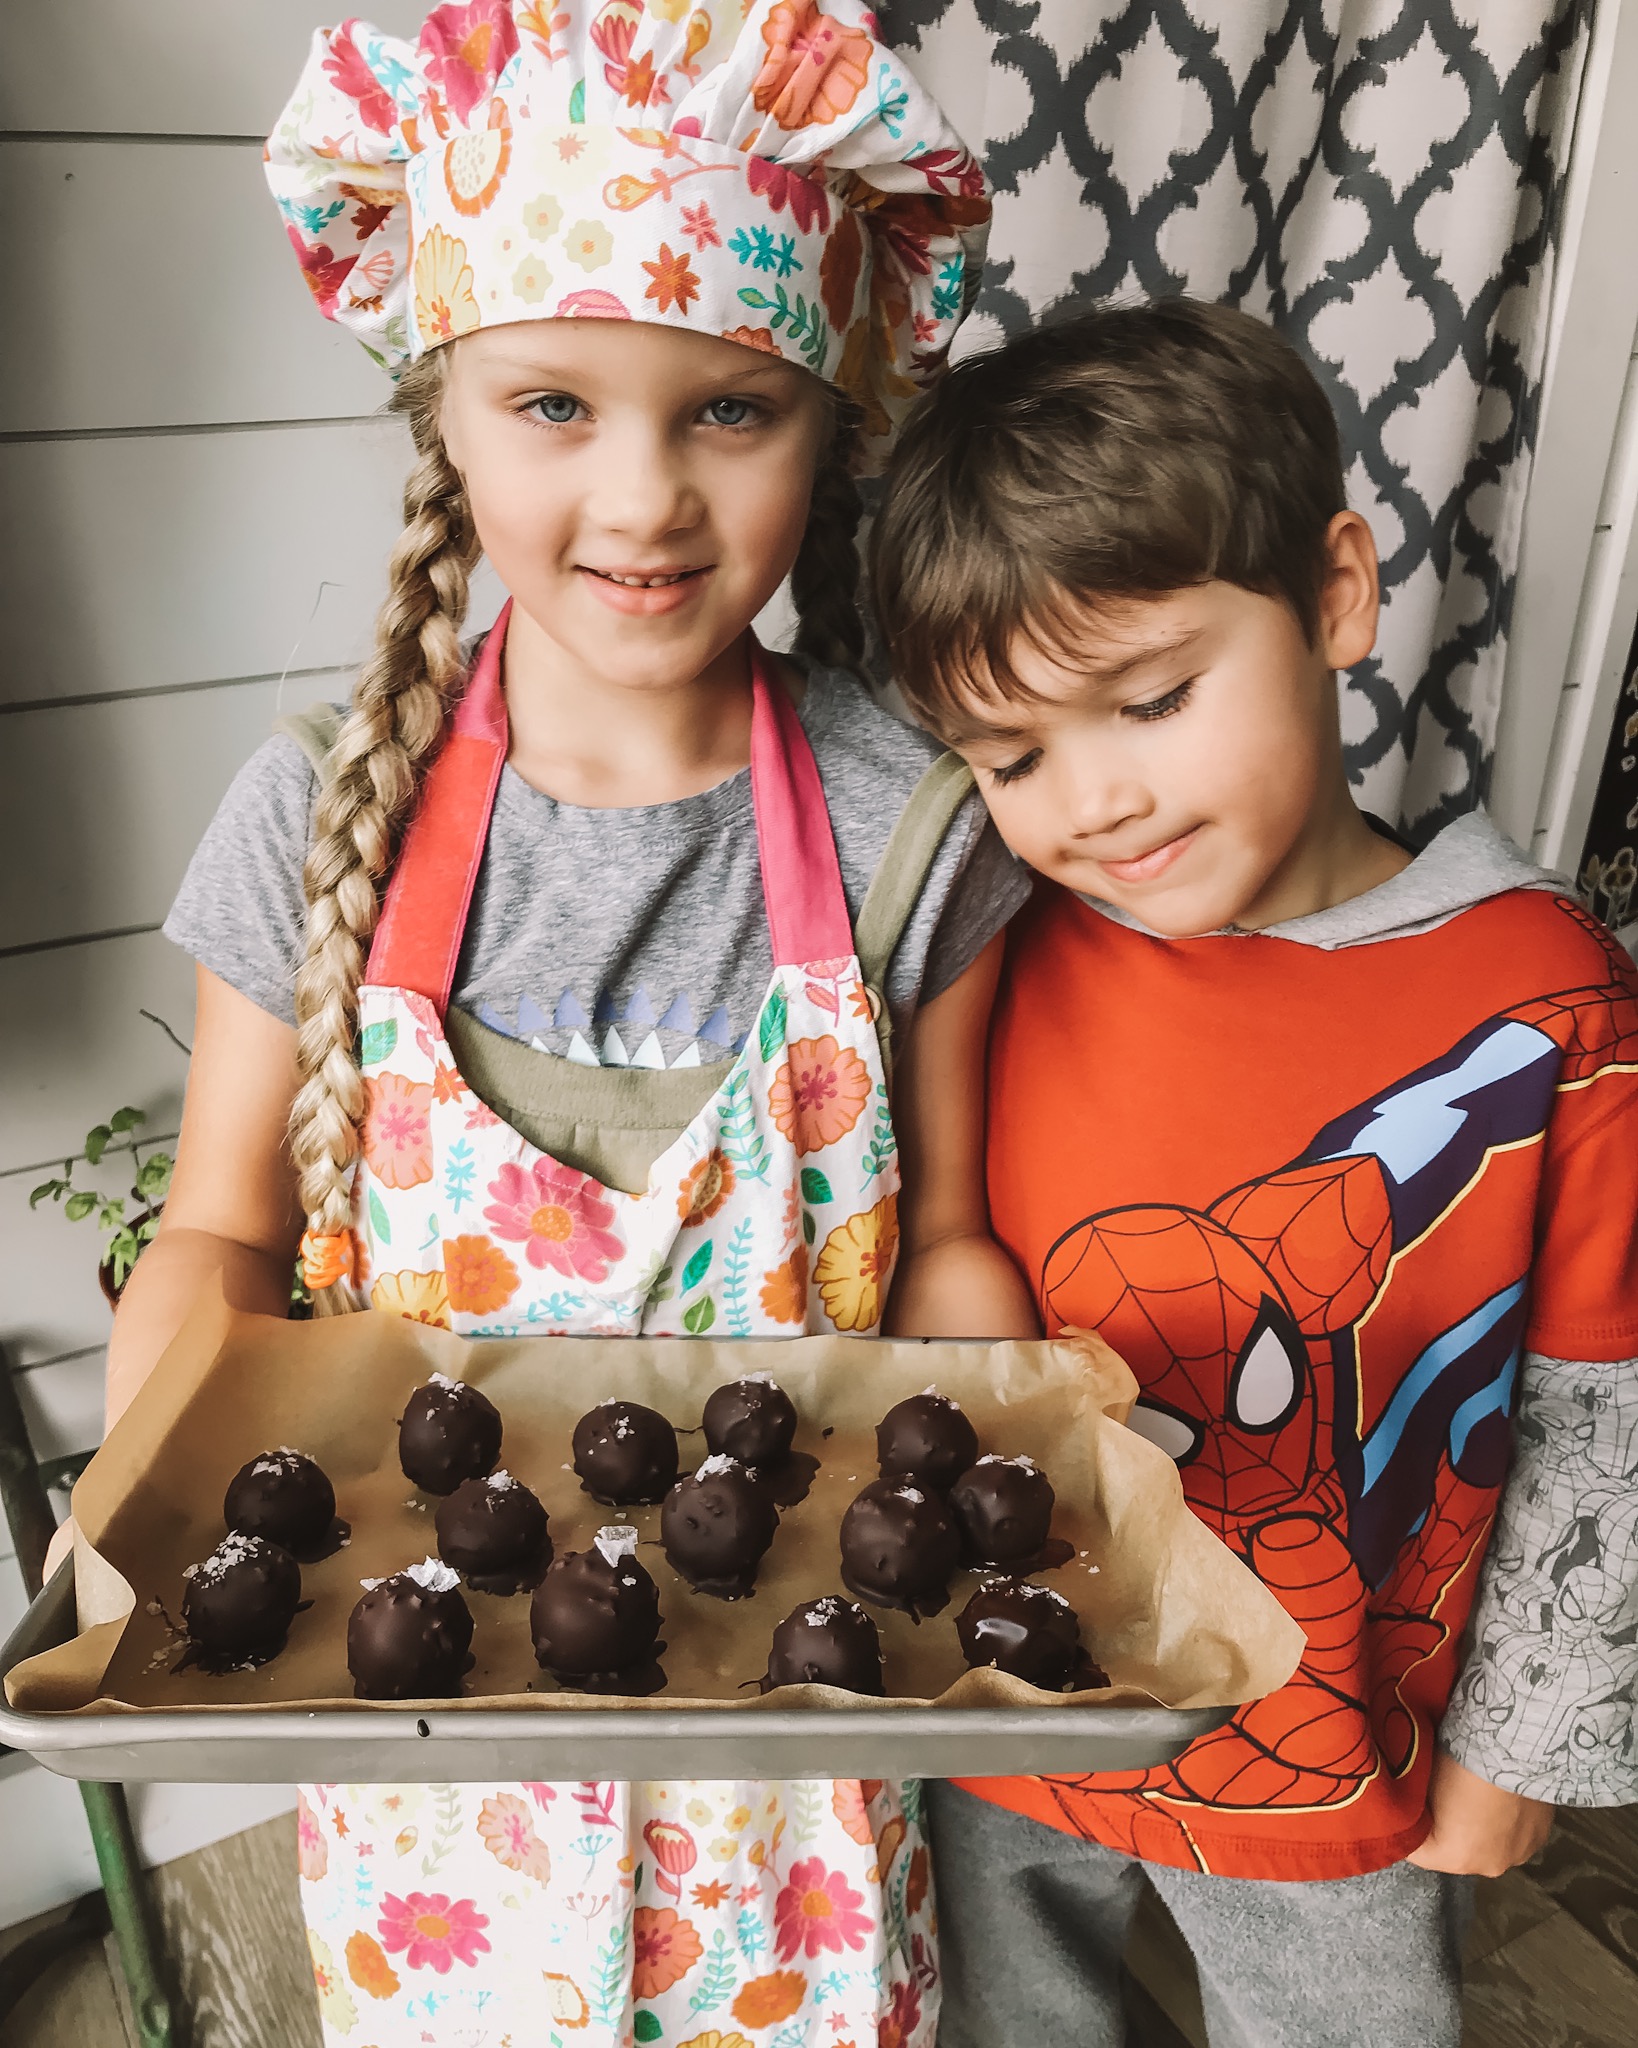 Stormy and Everly Admiring their homemade twix balls